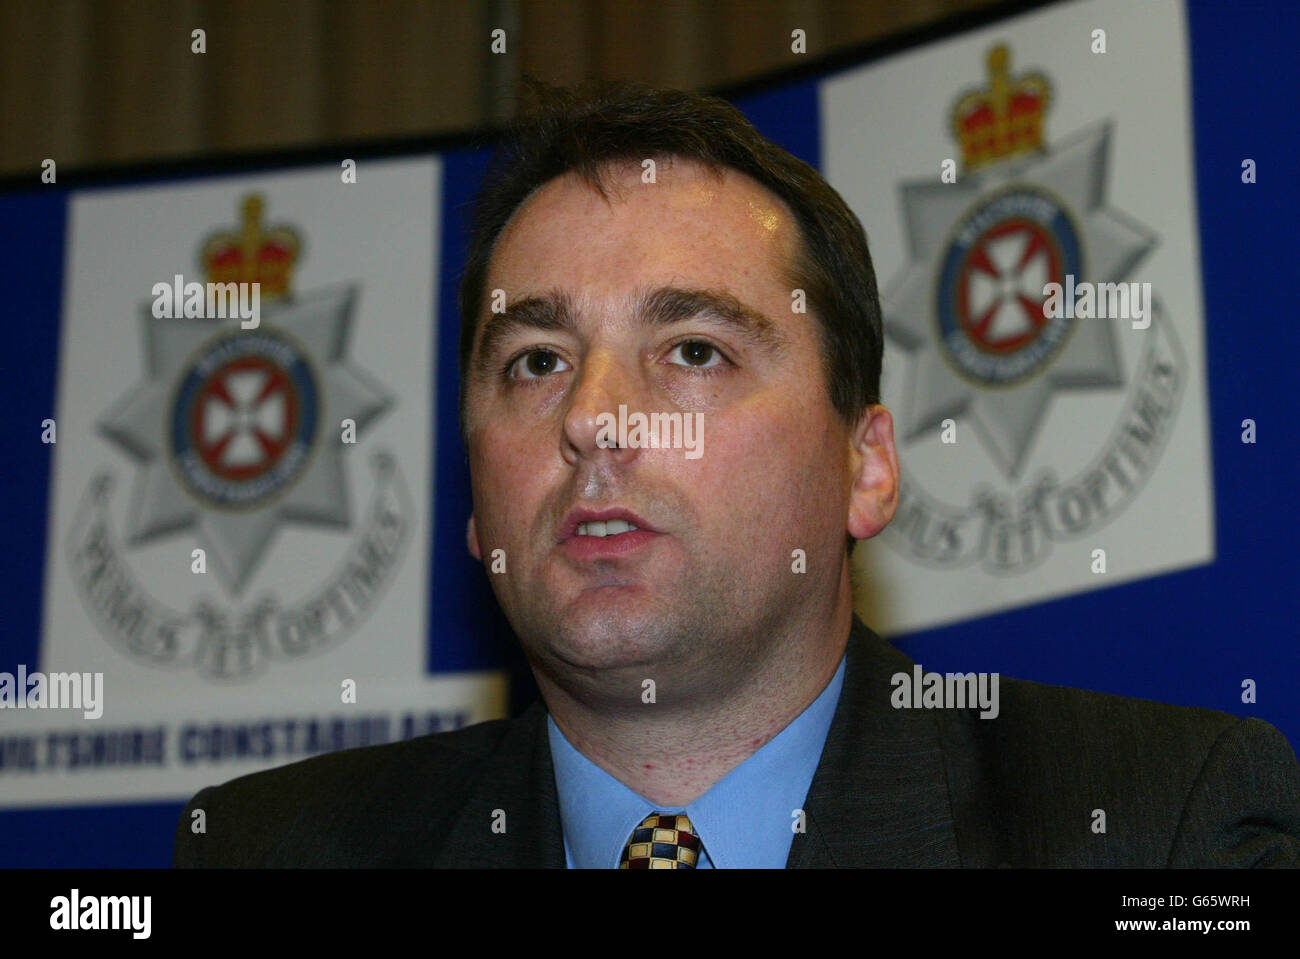 Wiltshire Police Detective Sergeant Andy Cross at a press conference in Salisbury. A soldier was fighting for his life in hospital after he was assaulted with a pick axe during a training exercise on Salisbury Plain, police said. * Lance Corporal Konrad Bisping, 26, from the 1st Battalion of the Queen's Lancashire Regiment, based at Catterick, North Yorkshire, underwent emergency surgery to remove the pick axe after it was embedded into his head during the attack. Detective Sergeant Andy Cross, from Wiltshire Police, said Lance Corporal Bisping was in a critical condition at Southampton Stock Photo